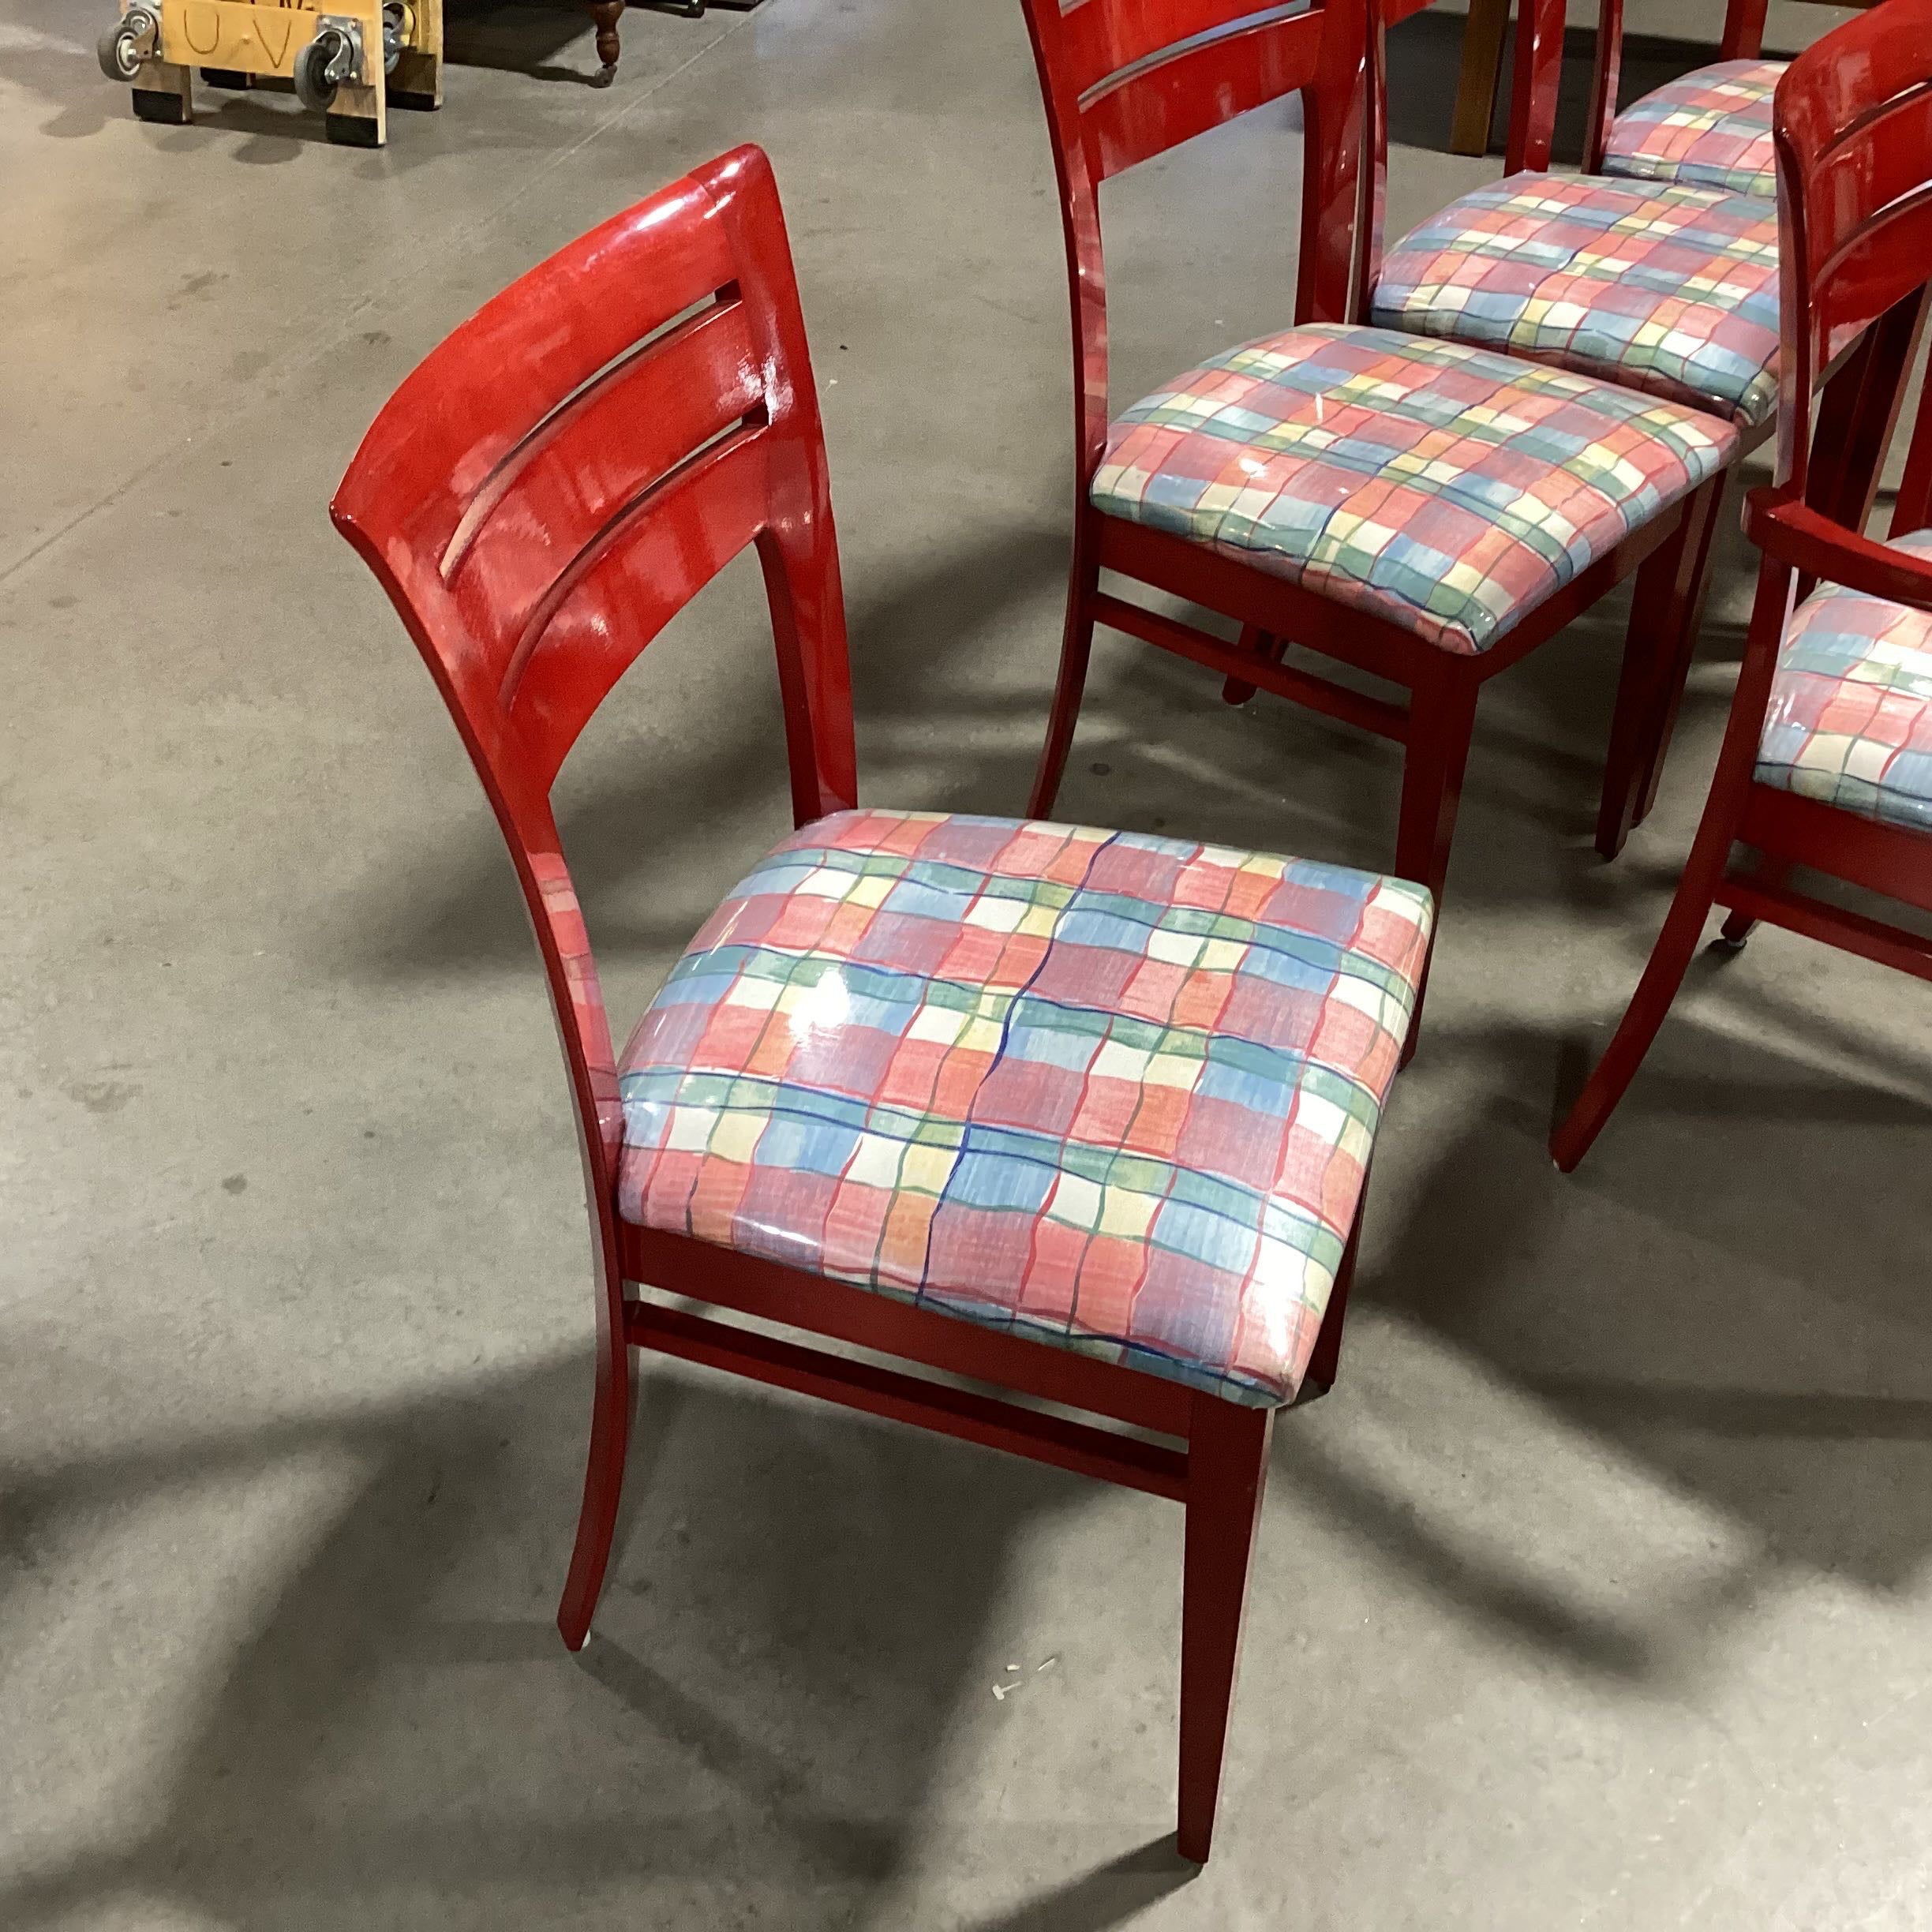 Set of 6 Red Lacquer and Chintz Plaid with Plastic Cover Dining Chairs